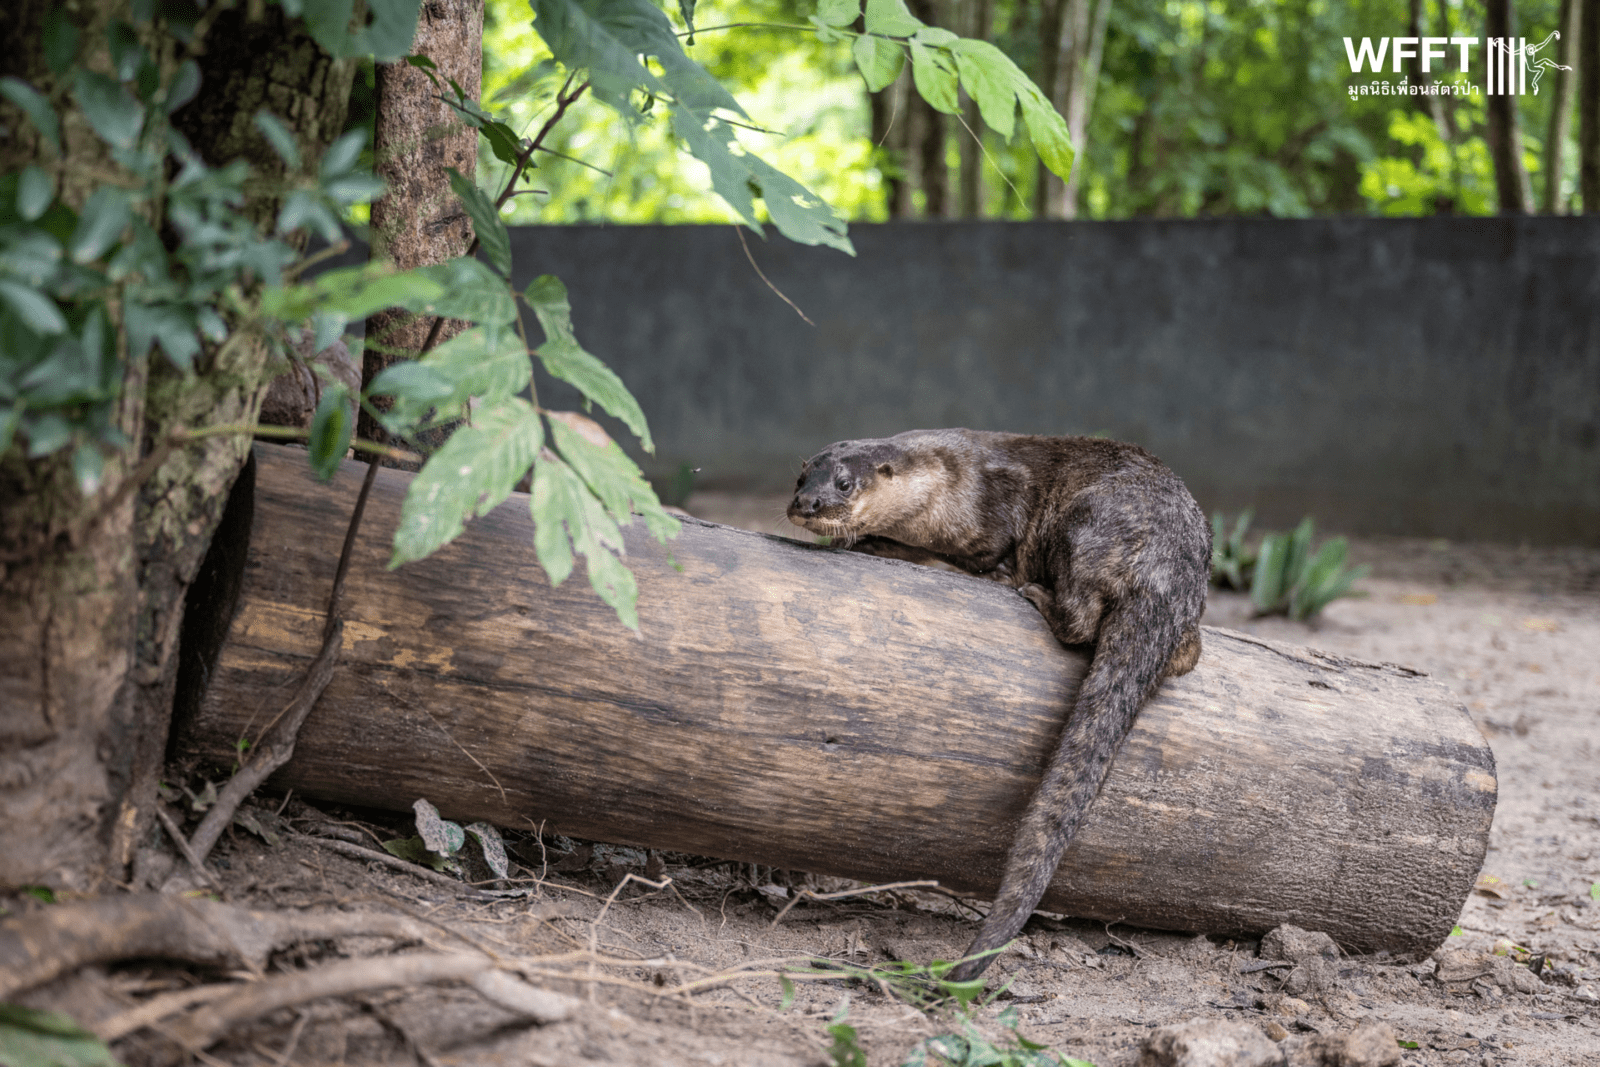 In Pictures: The “World's Rarest” Otter Enjoying Sanctuary Life at WFFT